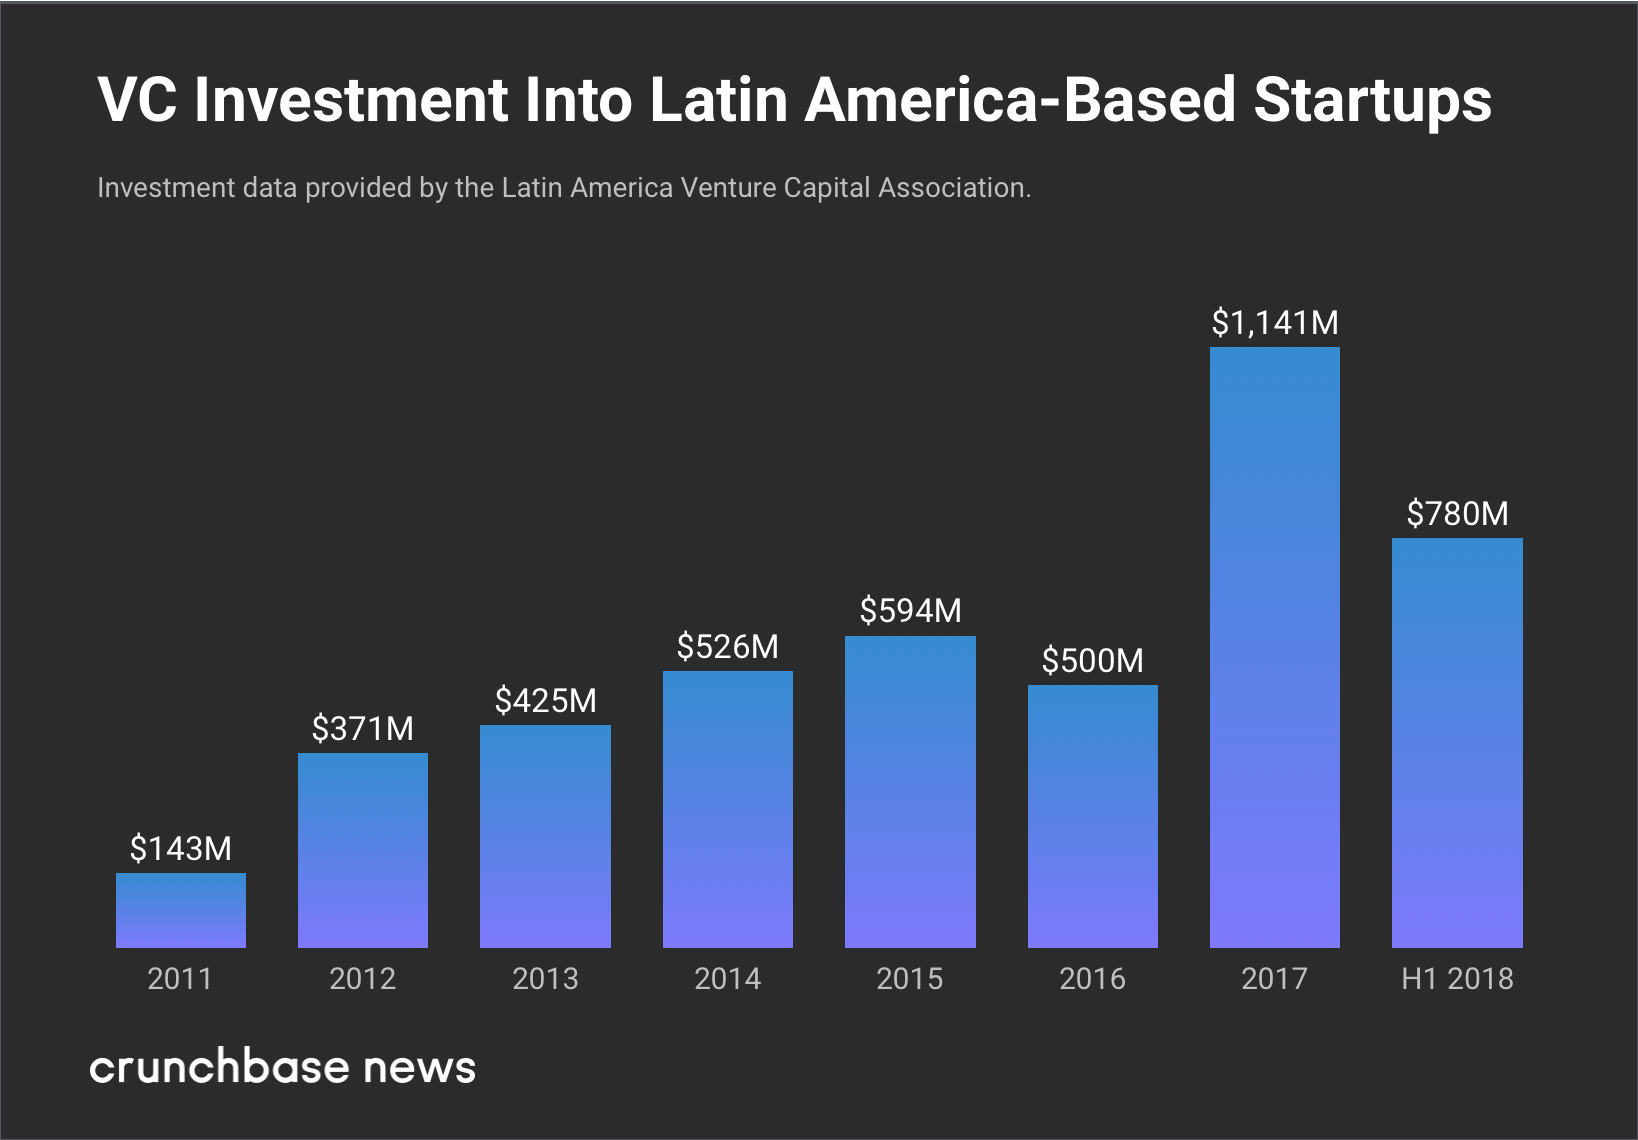 Latin America Fintech Startup Companies: VC Investment Into Latin America-Based Srtartups Over Time